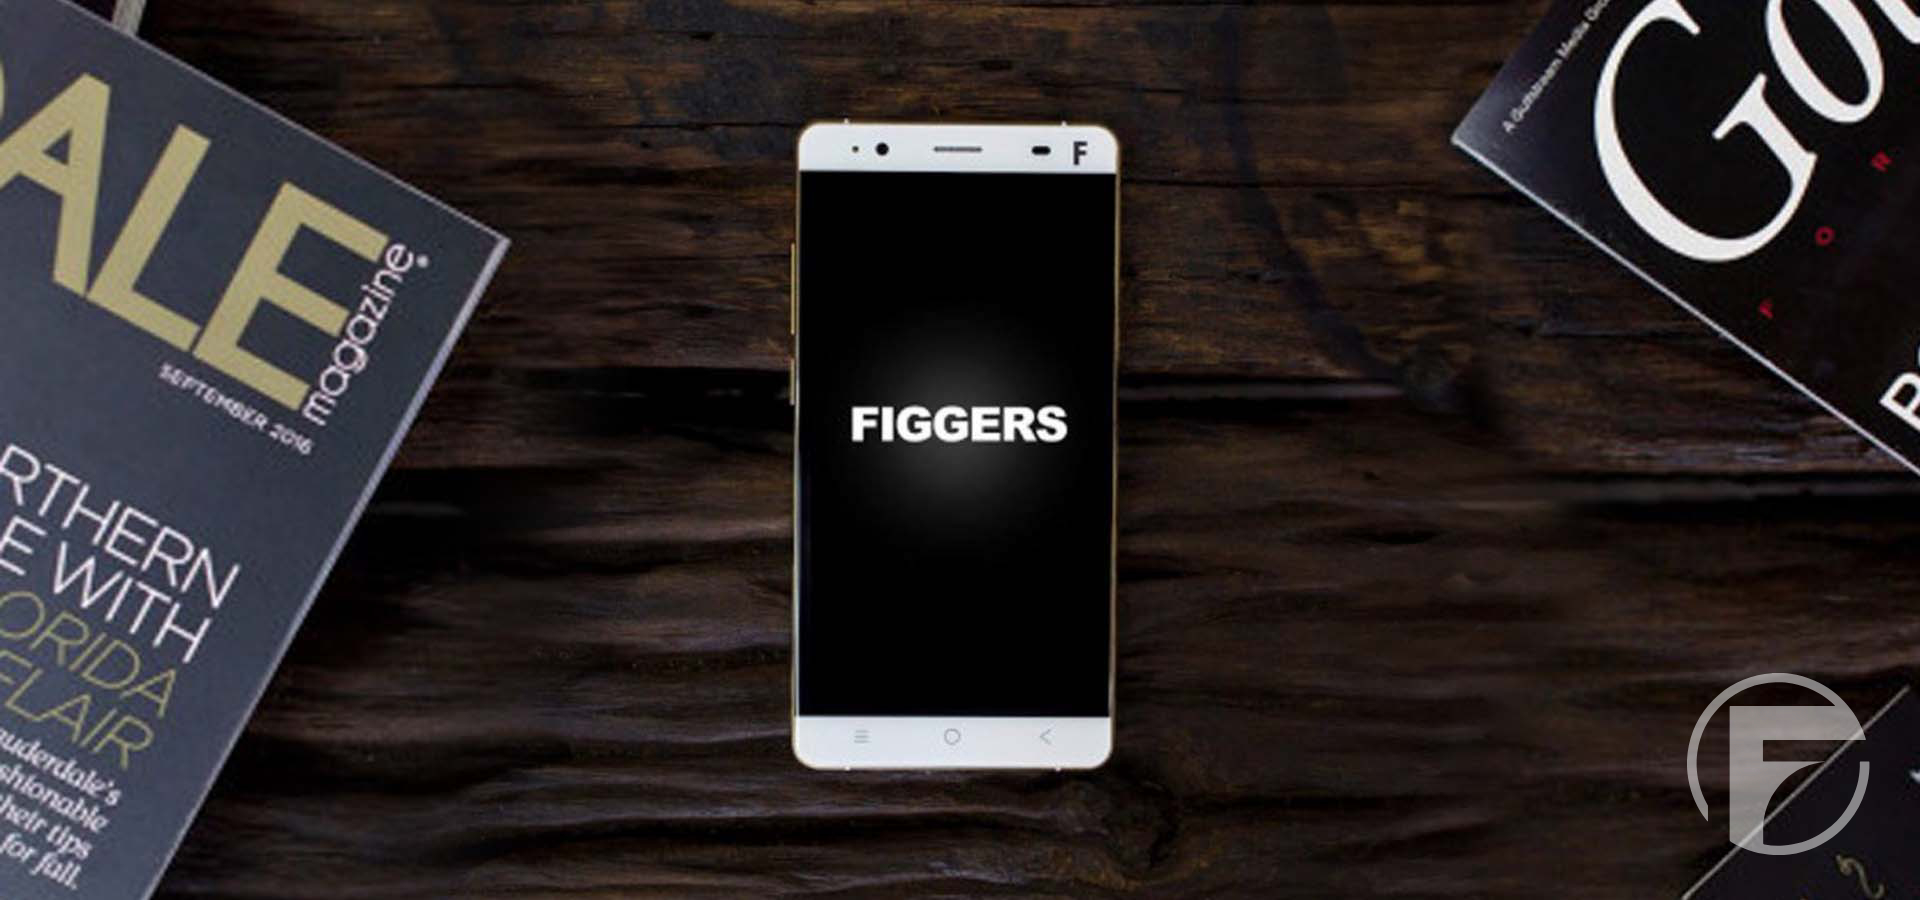 Figgers Communication is sending satellite phones to help families affected by the hurricanes